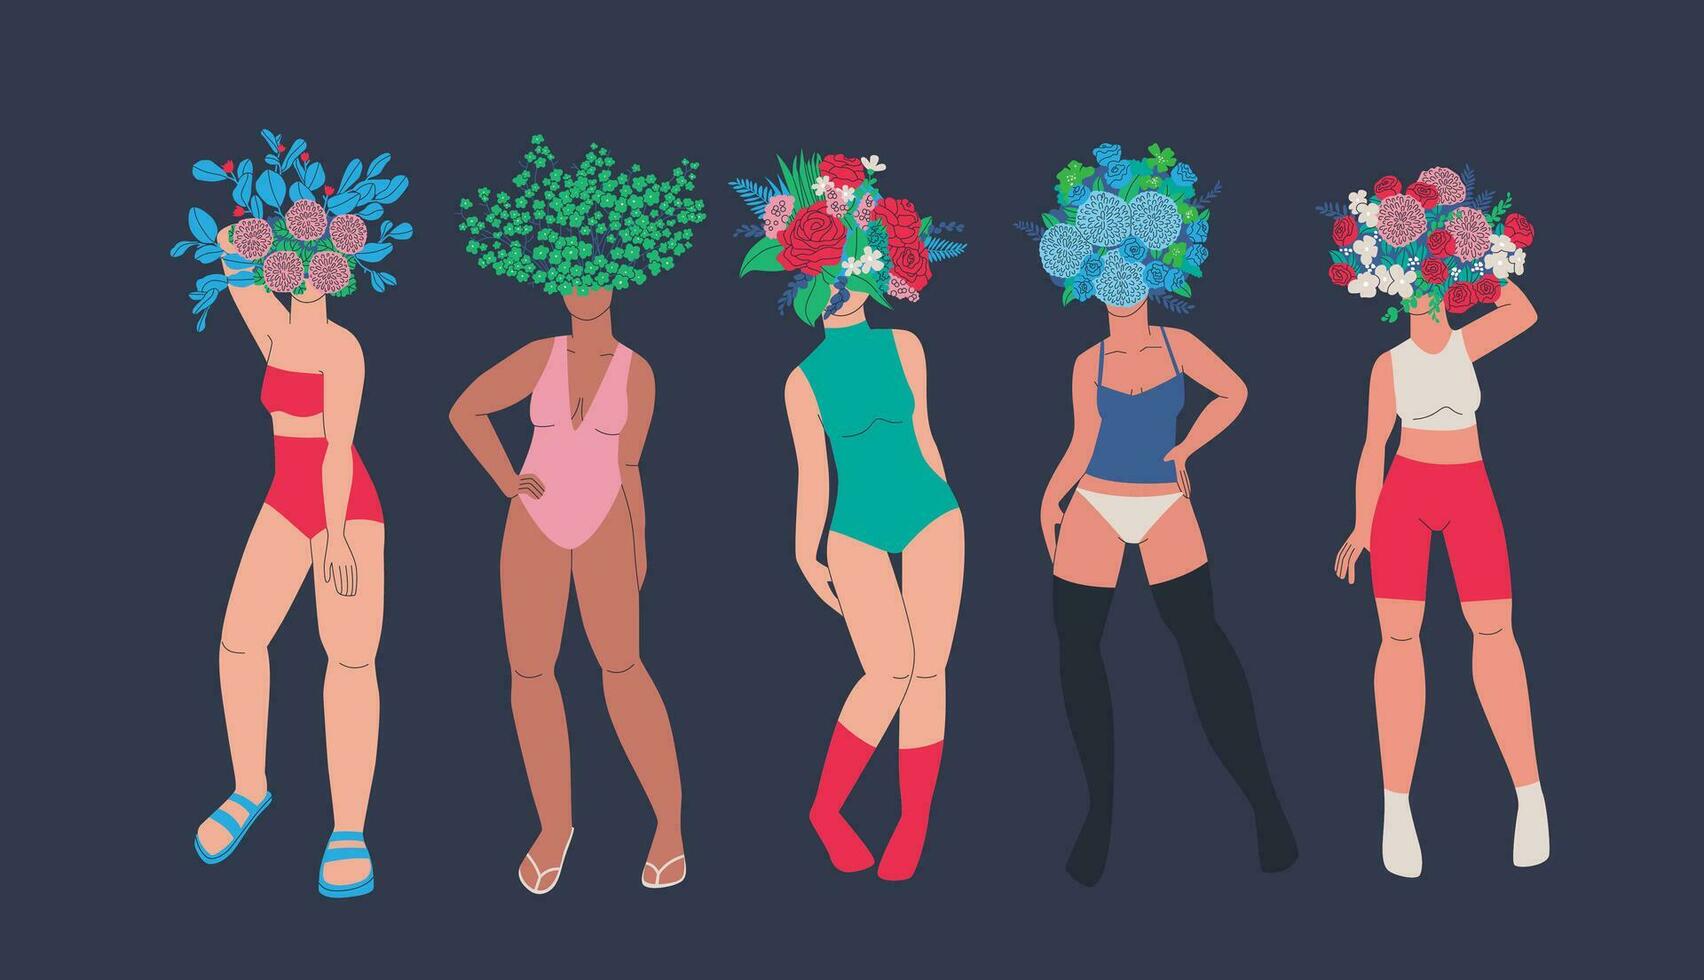 Women with huge bouquets of flowers on their heads. Beautiful female bodies in swimsuits or lingerie pose with various flowers and plants. Vector illustration.